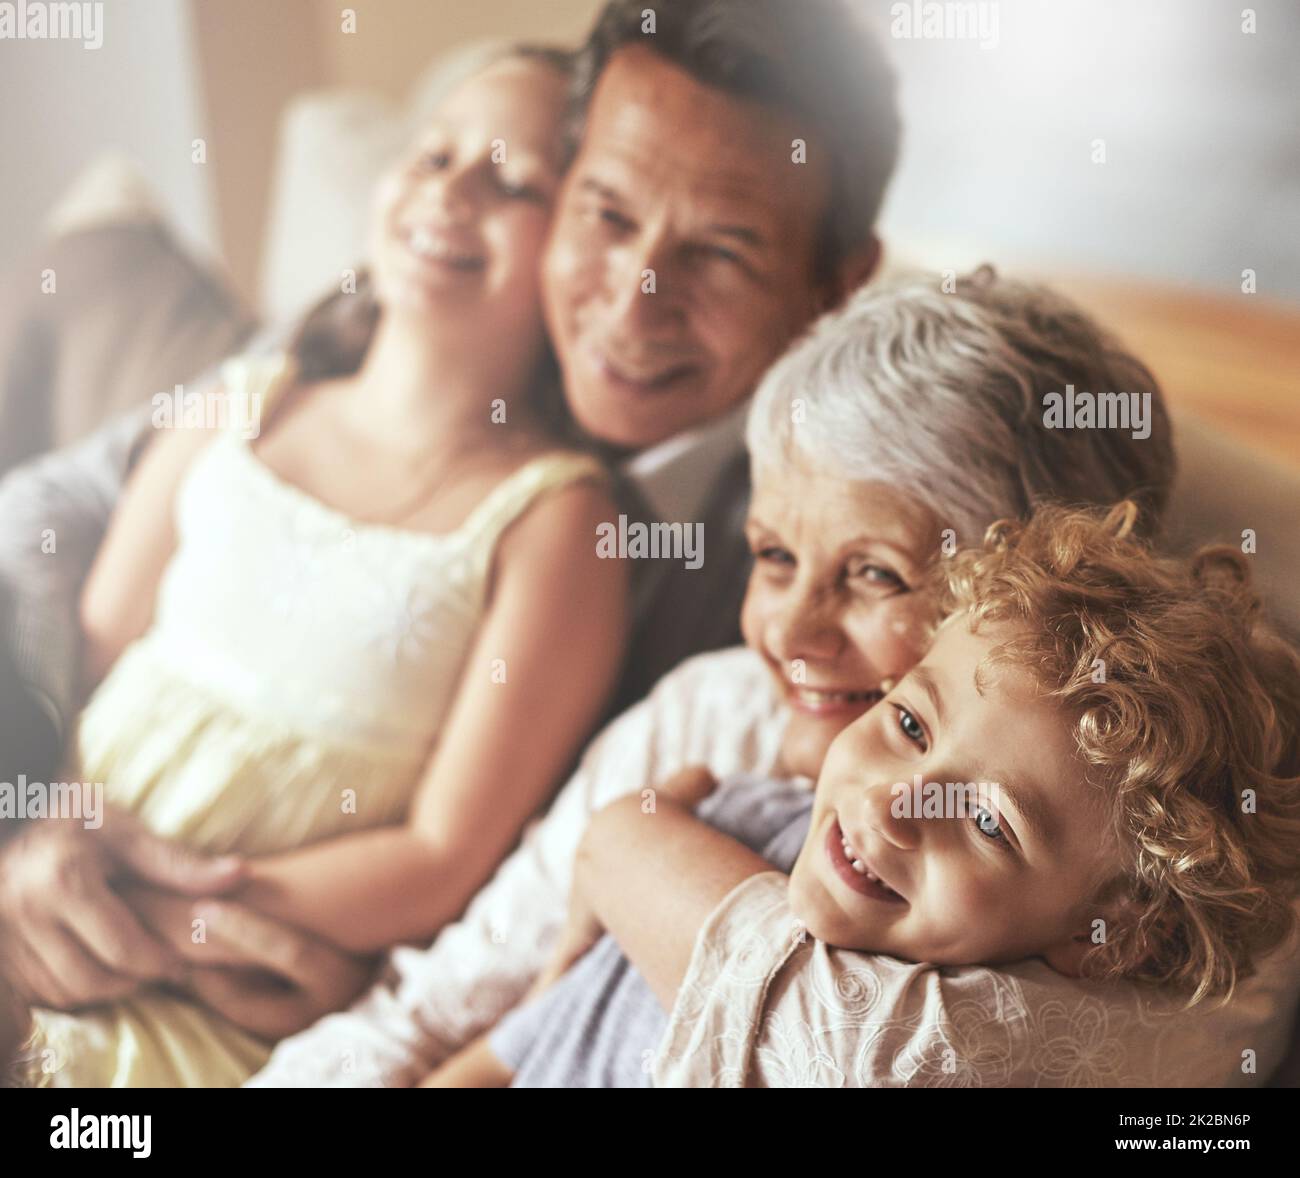 Our grandchildren are our greatest gifts. Shot of grandparents spending time with their grandchildren. Stock Photo